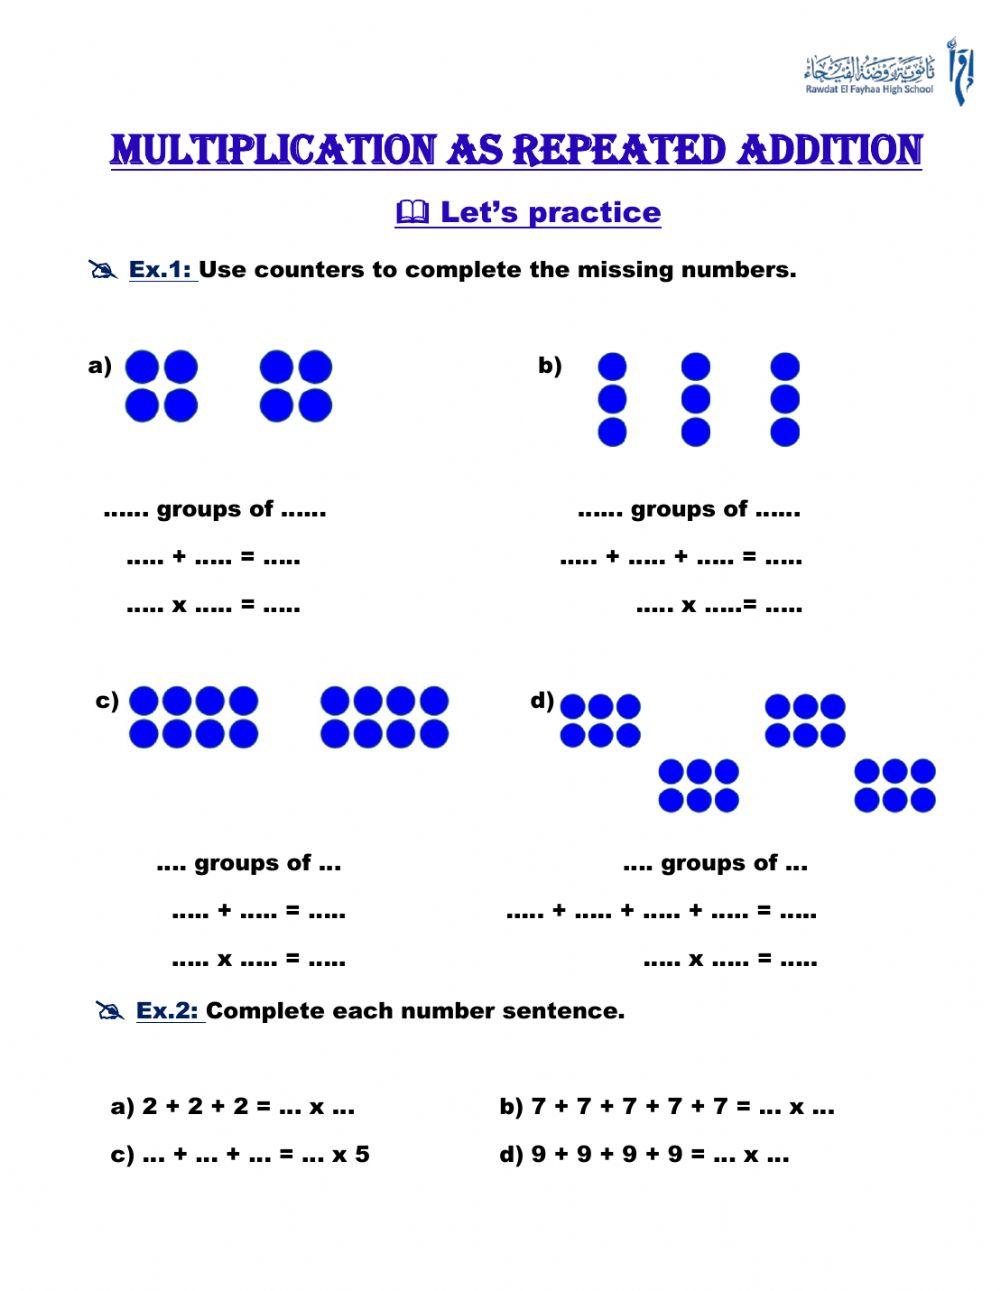 Multiplication as repeated addition2